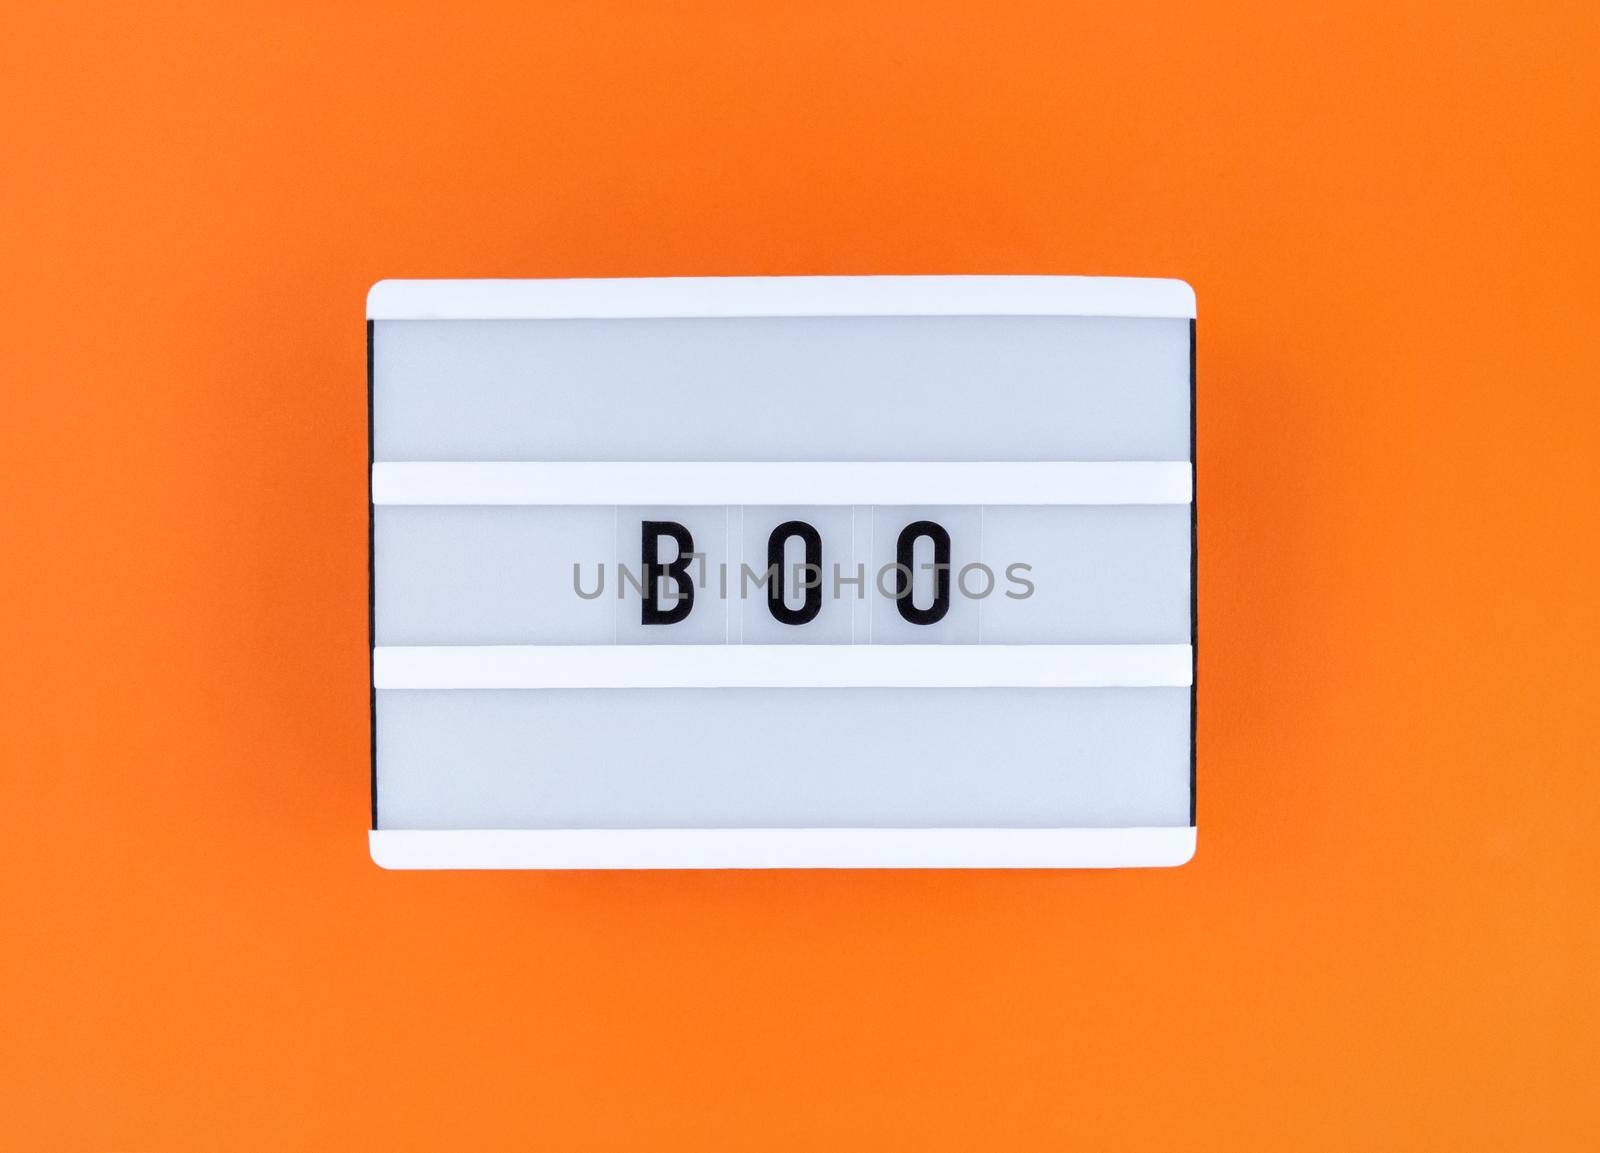 Light box with Boo word on orange background.